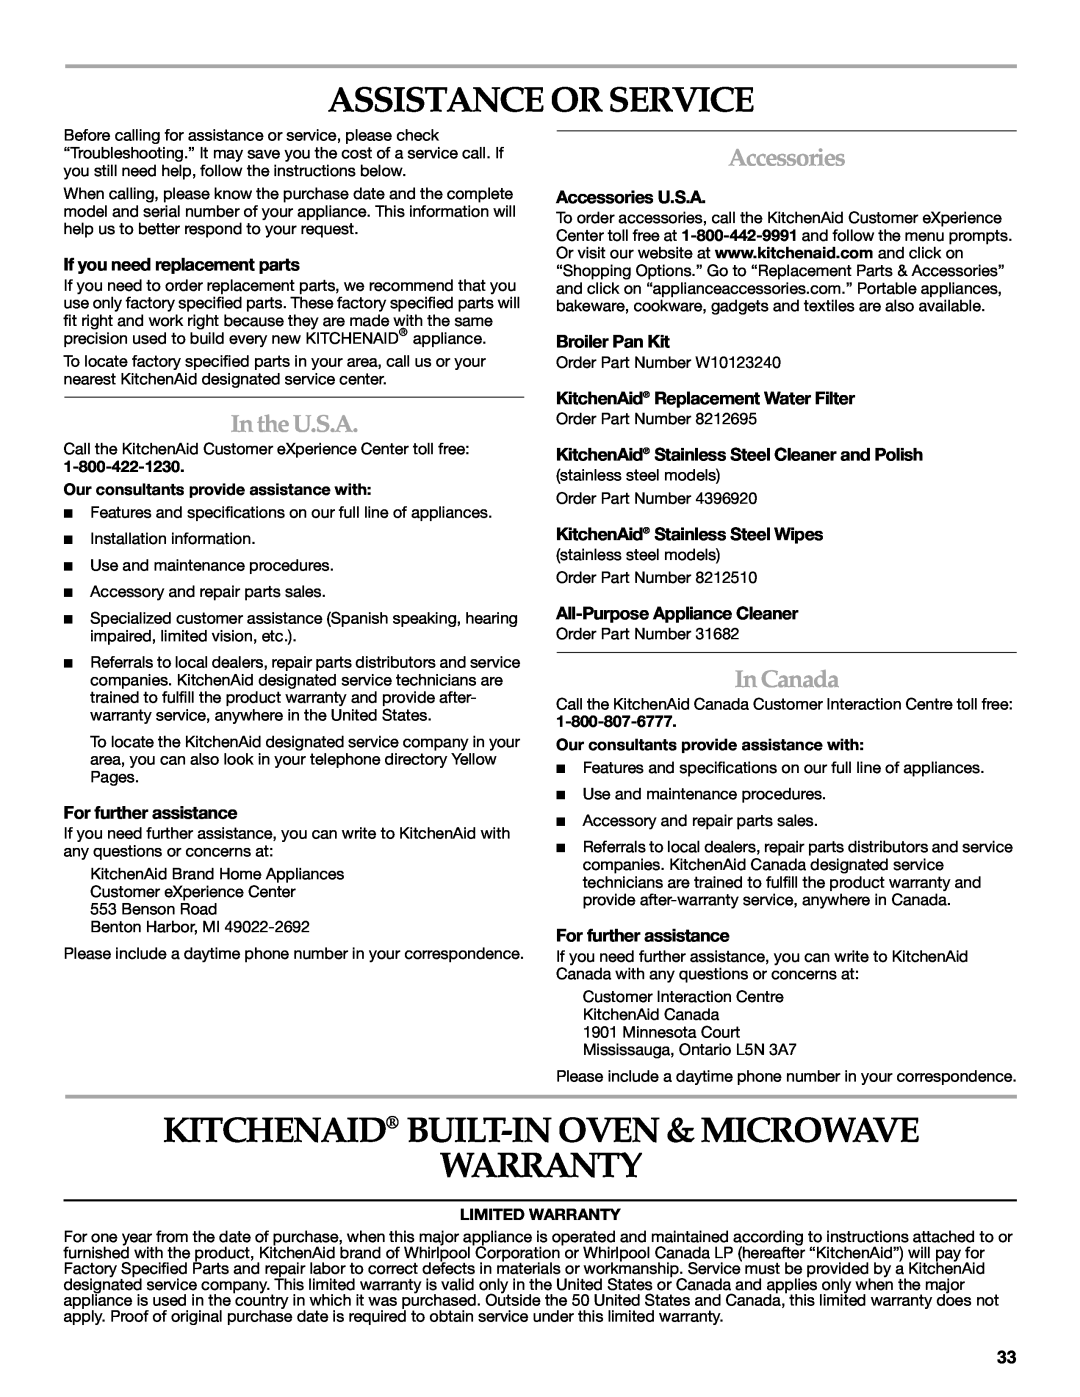 KitchenAid KEHU309 Assistance Or Service, Kitchenaid Built-In Oven & Microwave Warranty, IntheU.S.A, Accessories, InCanada 